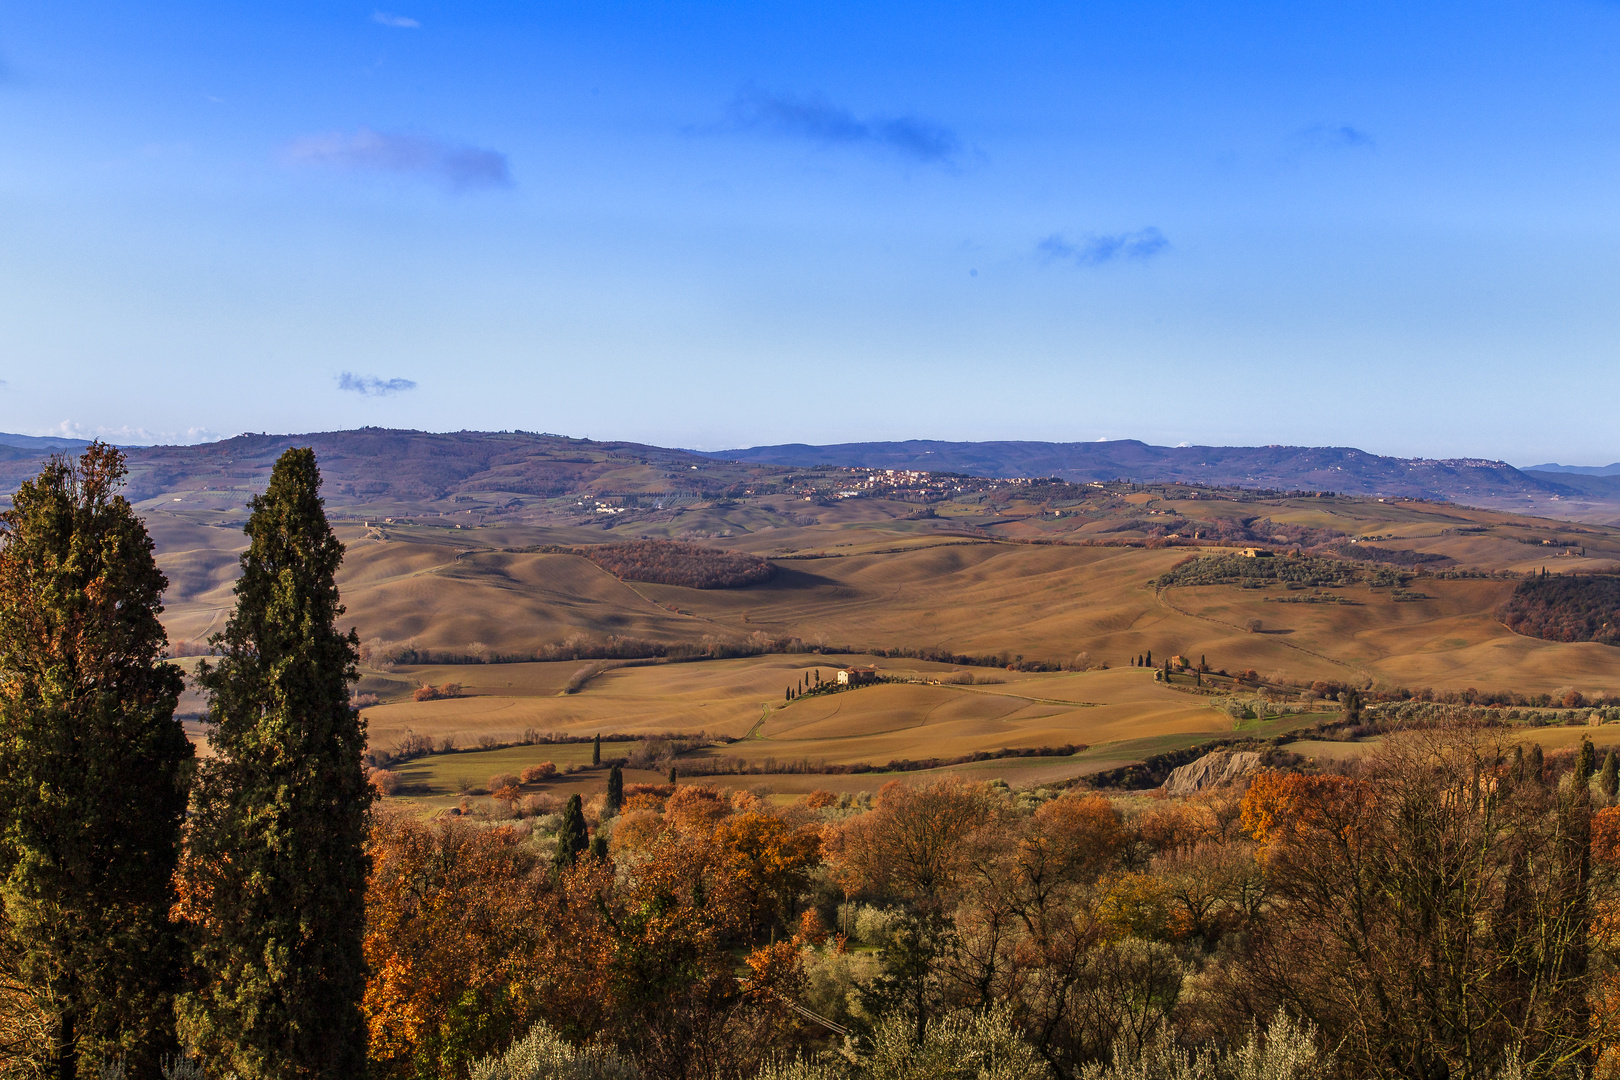 Val d'Orcia...Beautiful day